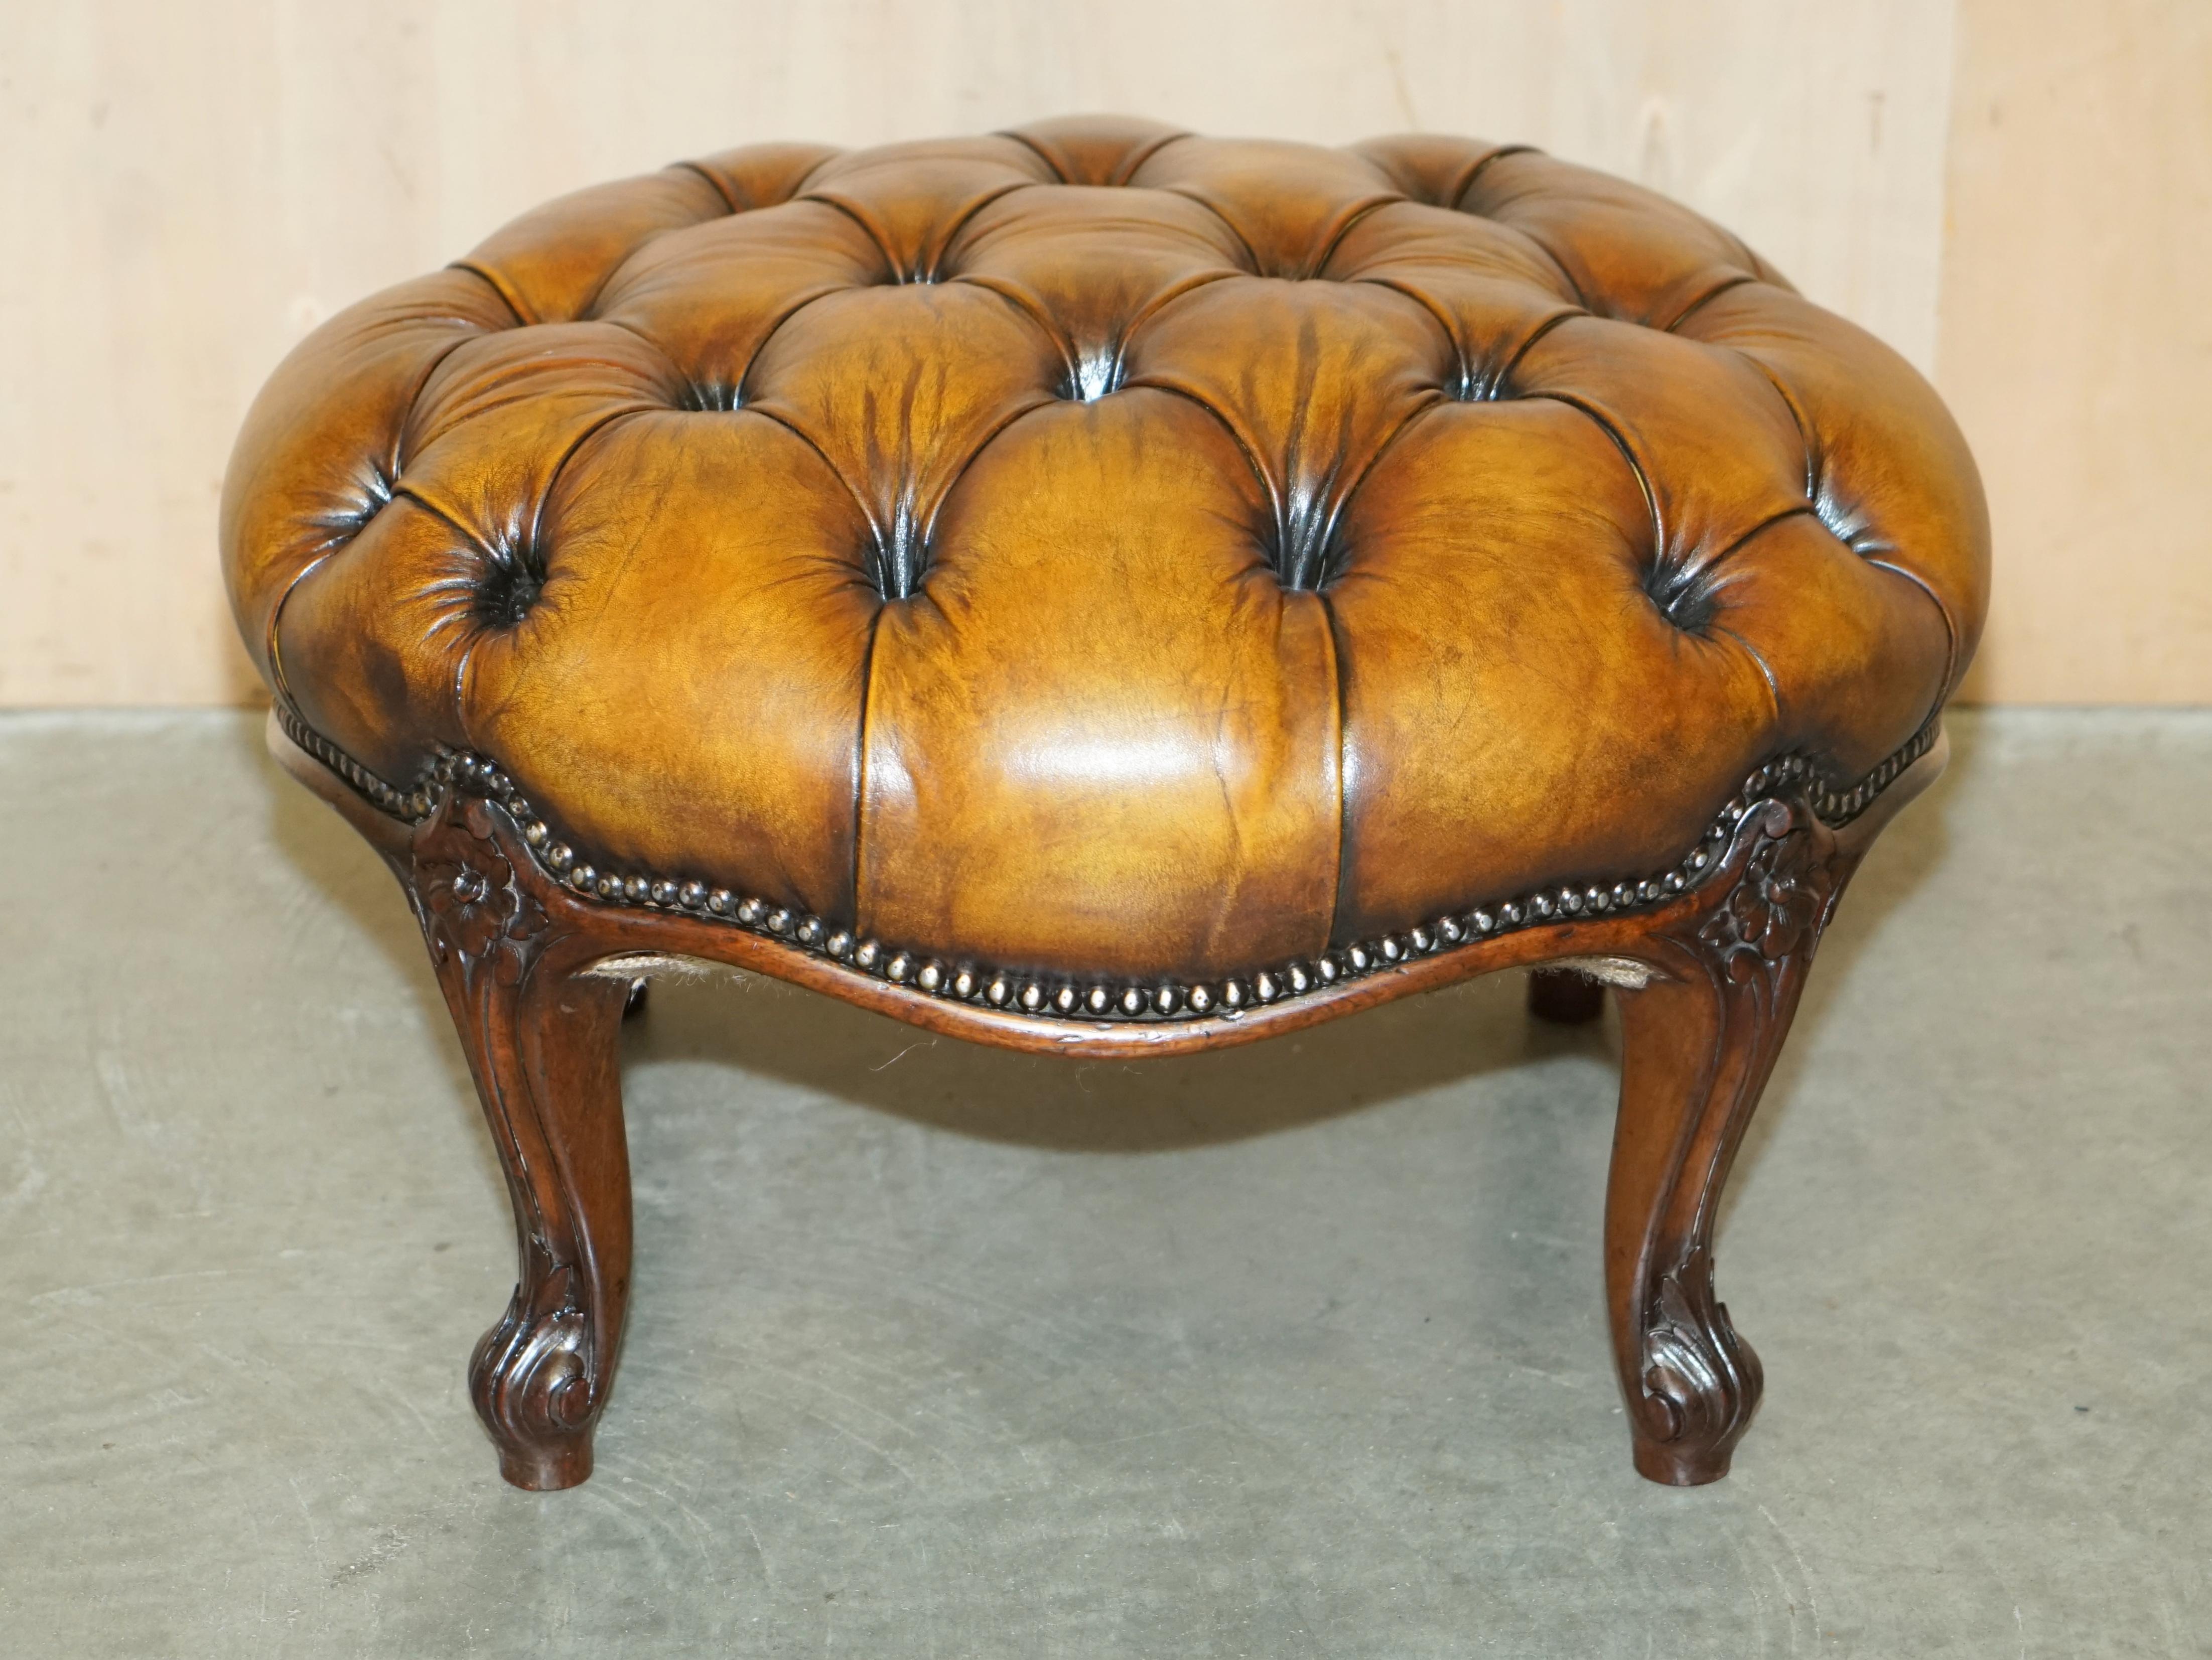 STUNNING ANTIQUE RESTORED HAND DYED CiGAR BROWN LEATHER CHESTERFIELD FOOTSTOOL 6